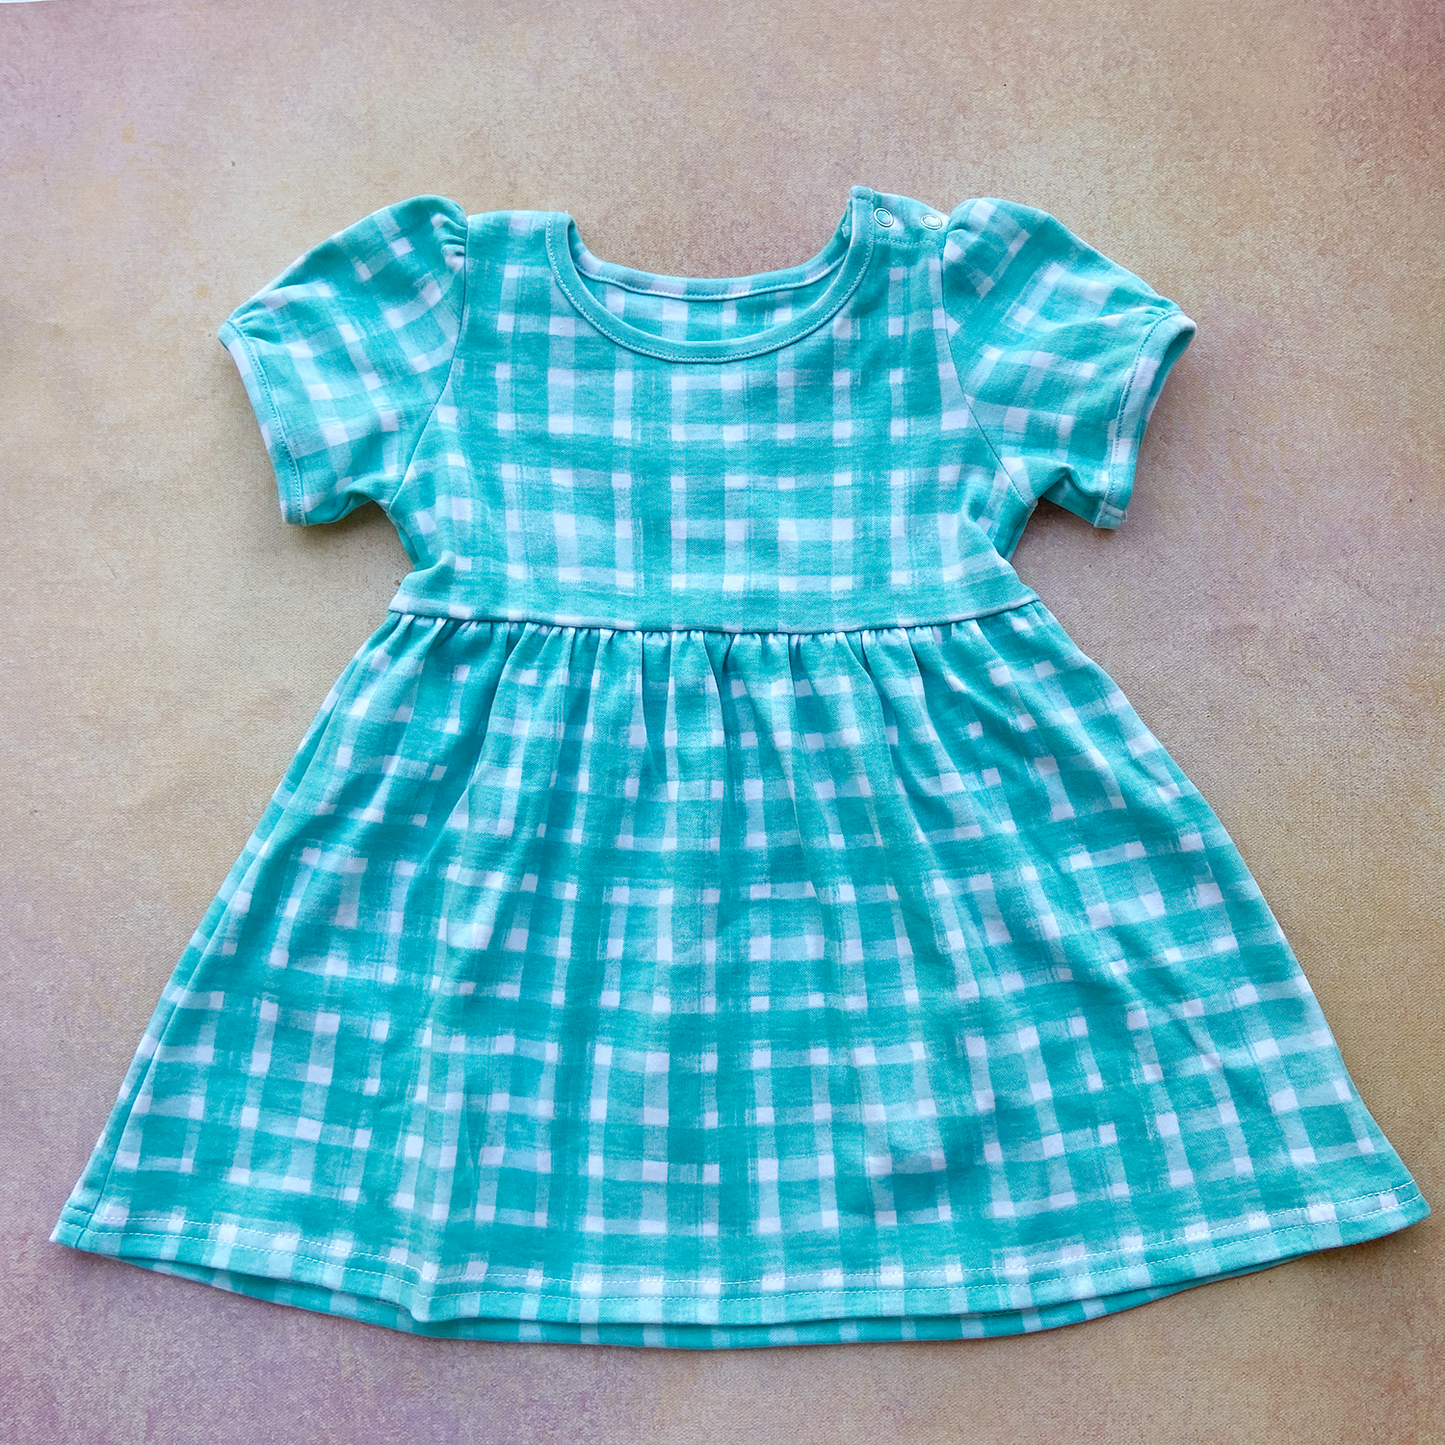 Baby Frock - Size 1-2 YRS (Choose Print)